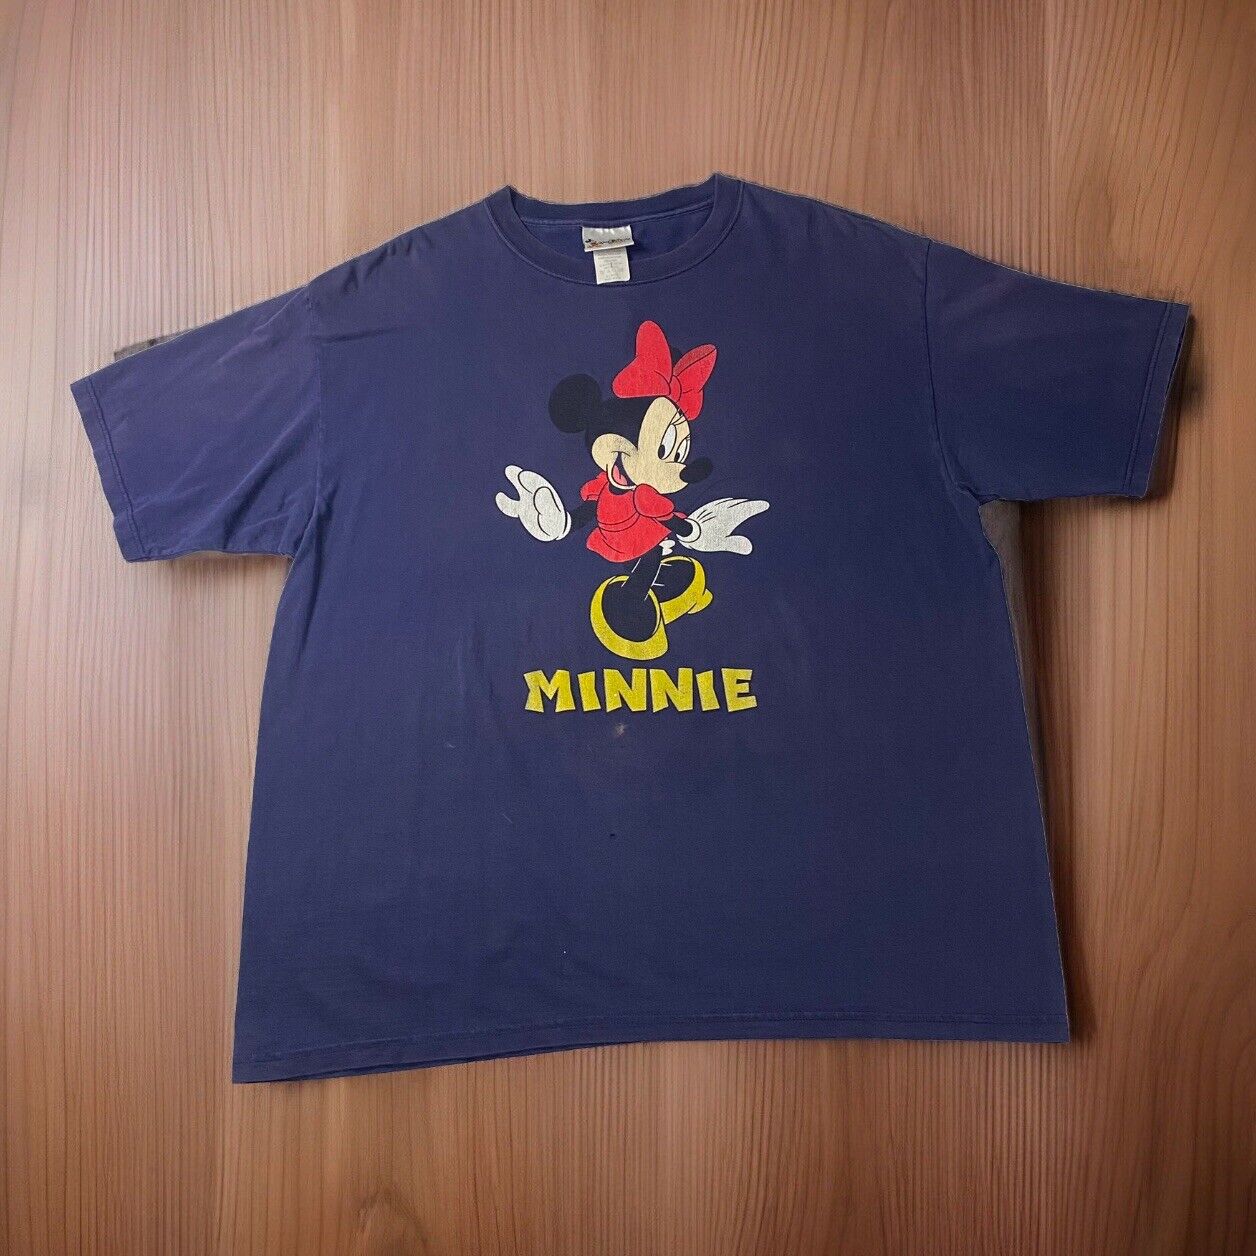 Vintage 80’s 90’s Disney World T Shirt Era Minnie Mouse Made In USA Large L